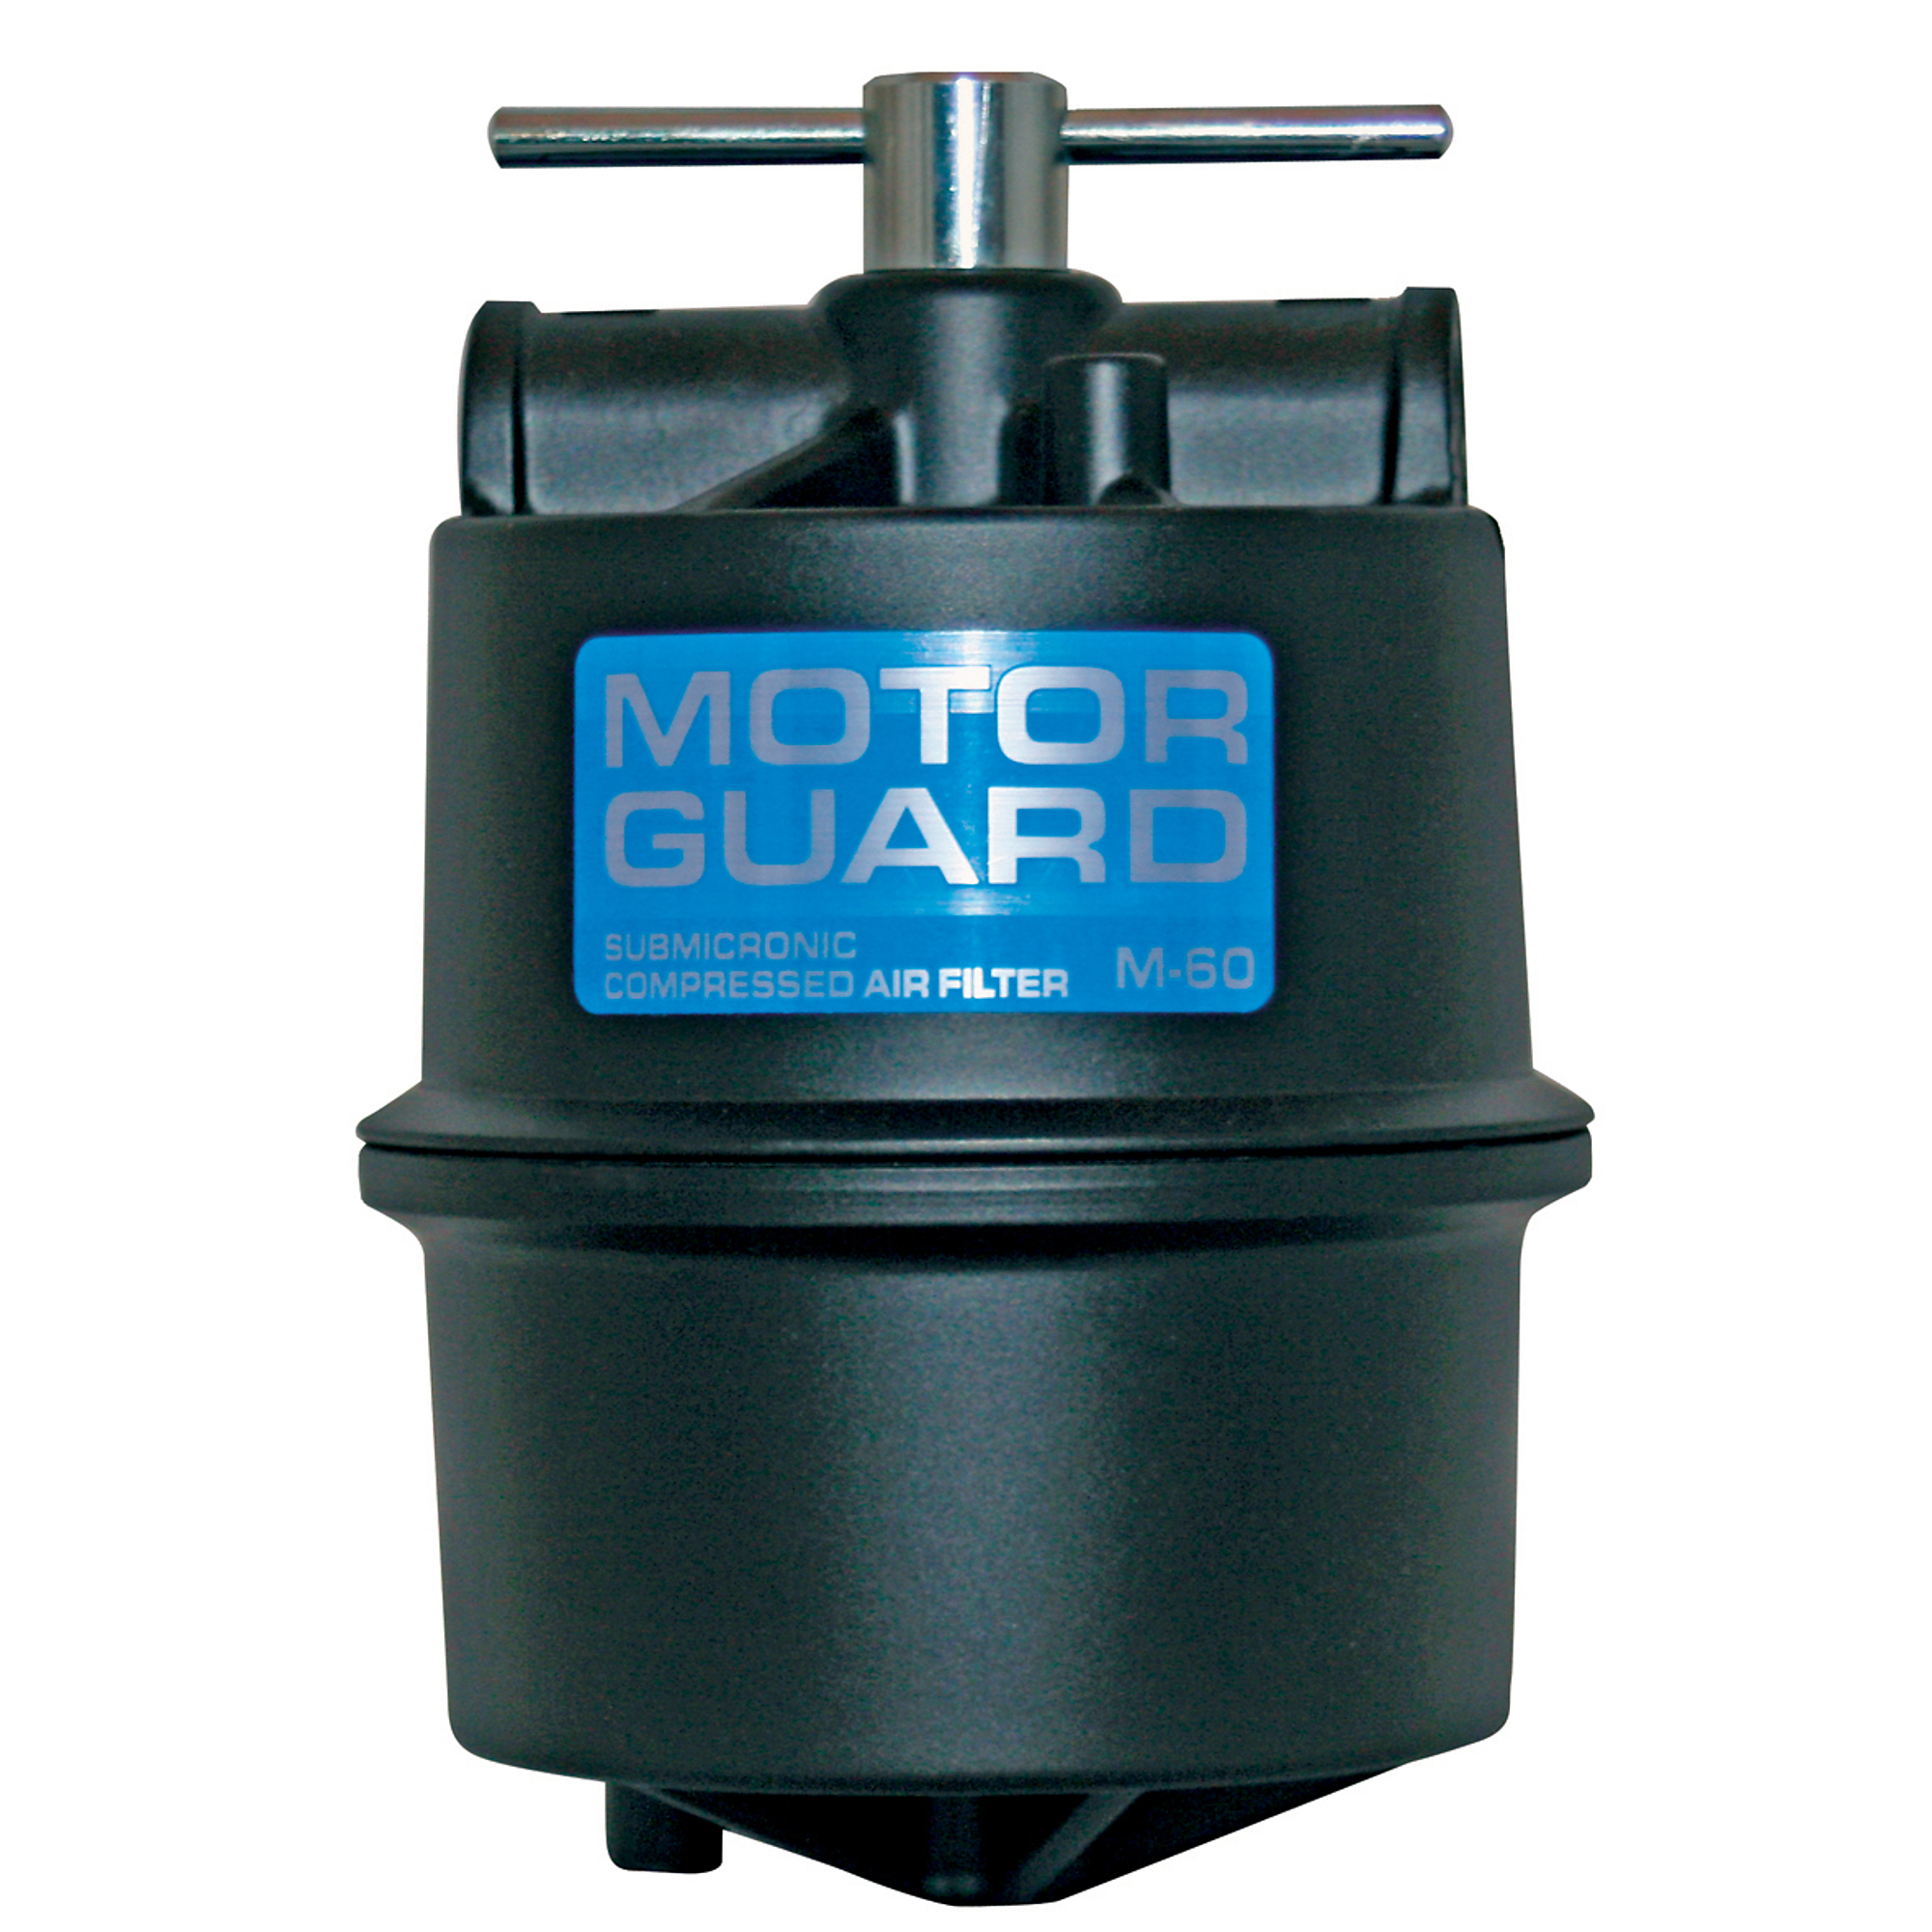 Motor Guard, Submicronic Compressed Air Filter 1/2 NPT, Model M-60